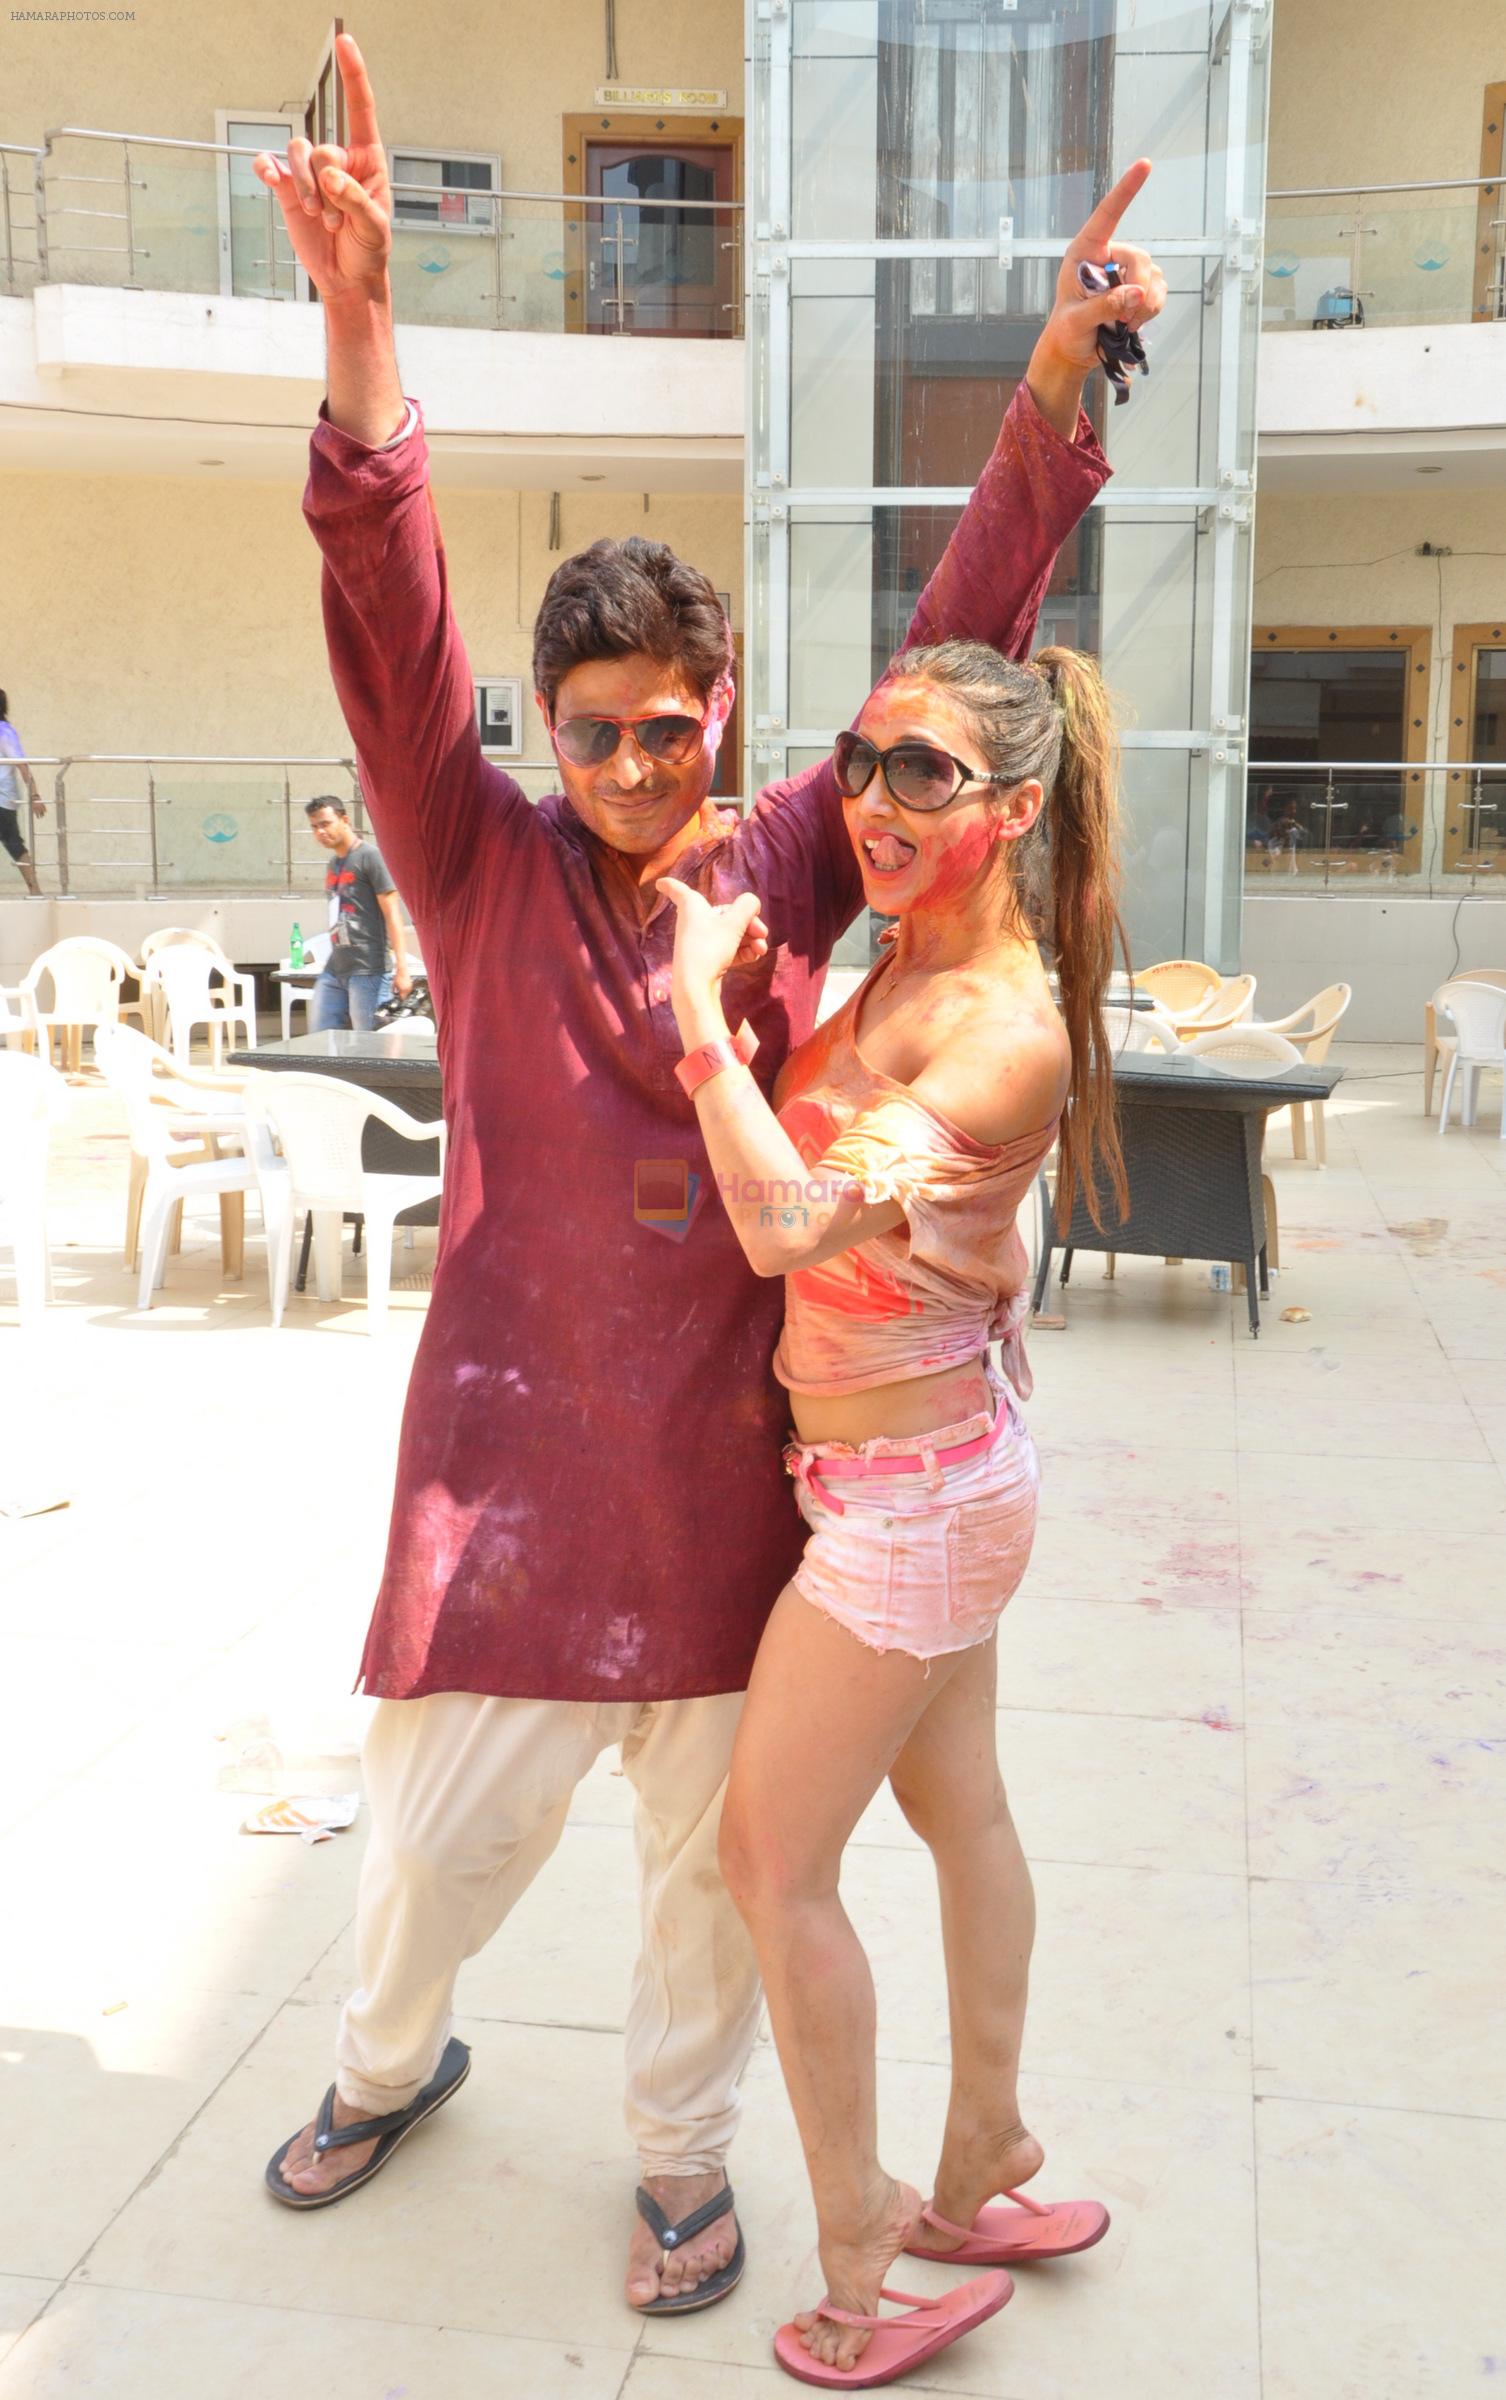 Mack with friend at Rasleela Holi 2014 by Mack & Neon 88 in Mumbai on 17th March 2014